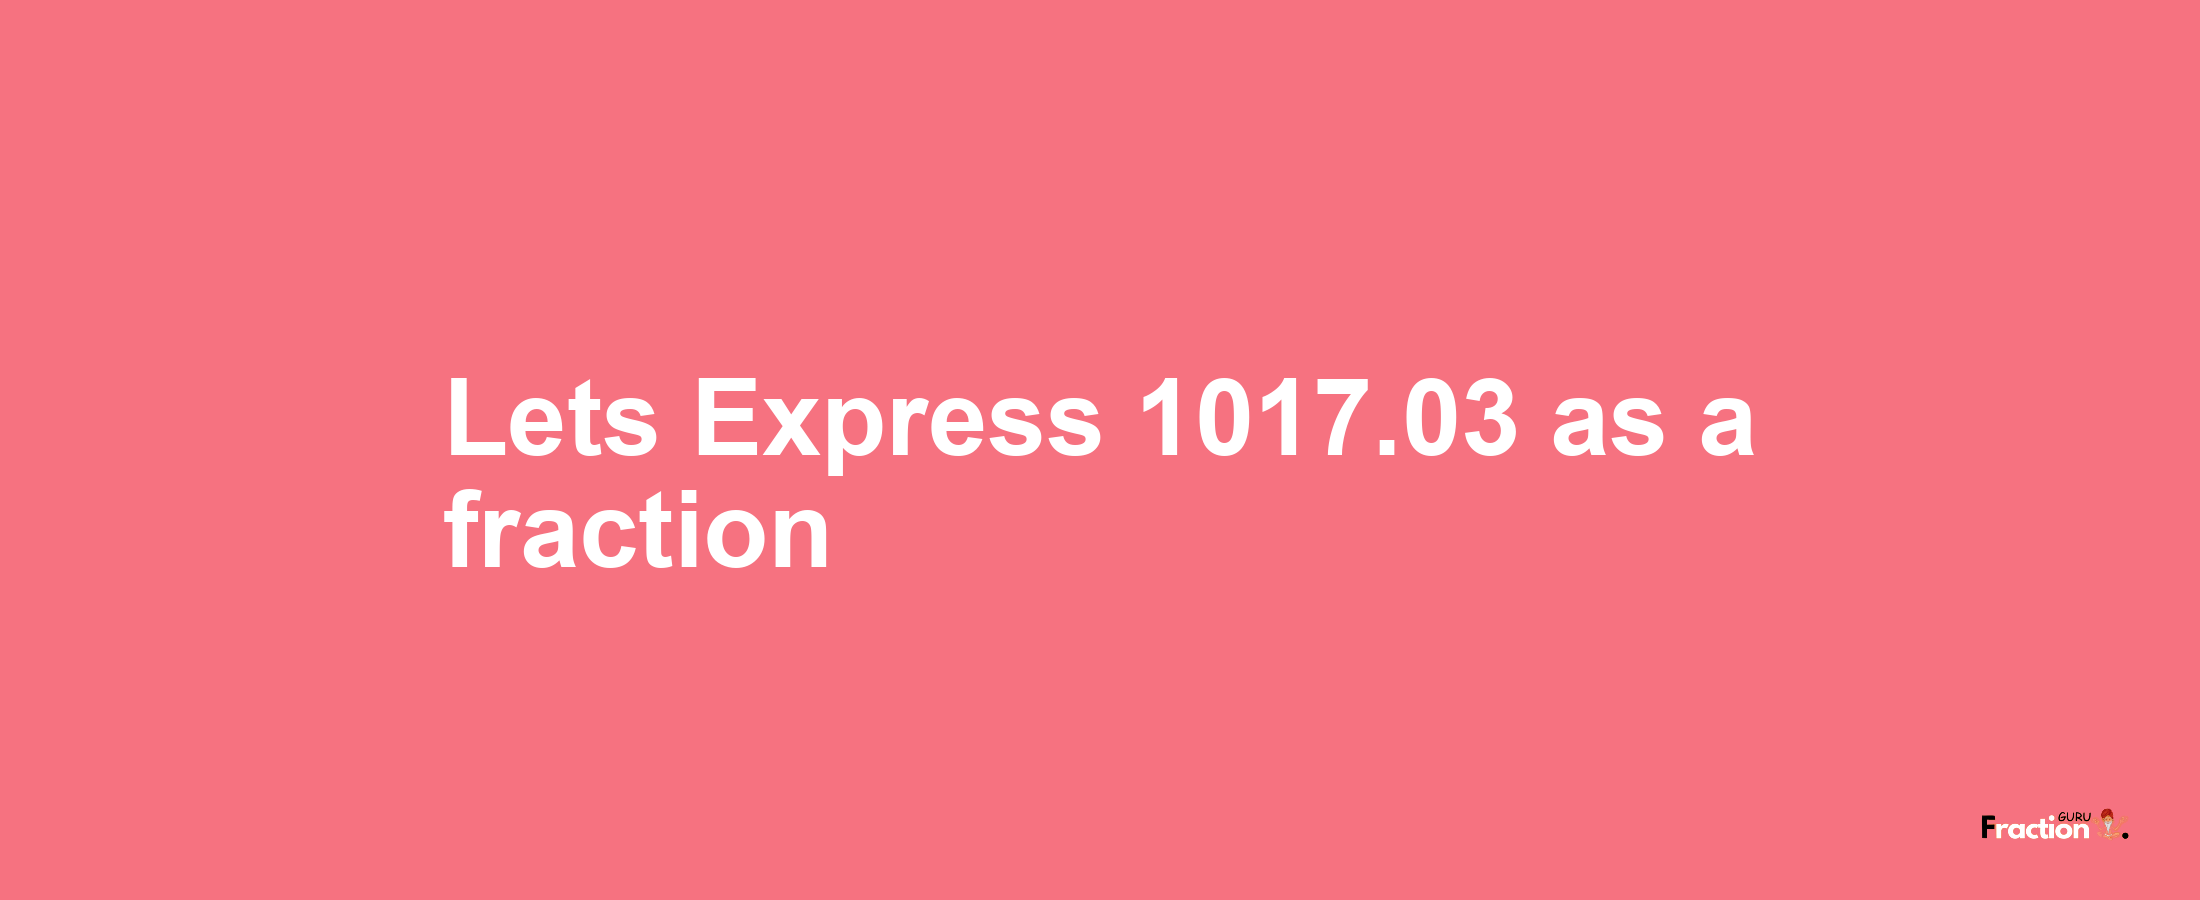 Lets Express 1017.03 as afraction